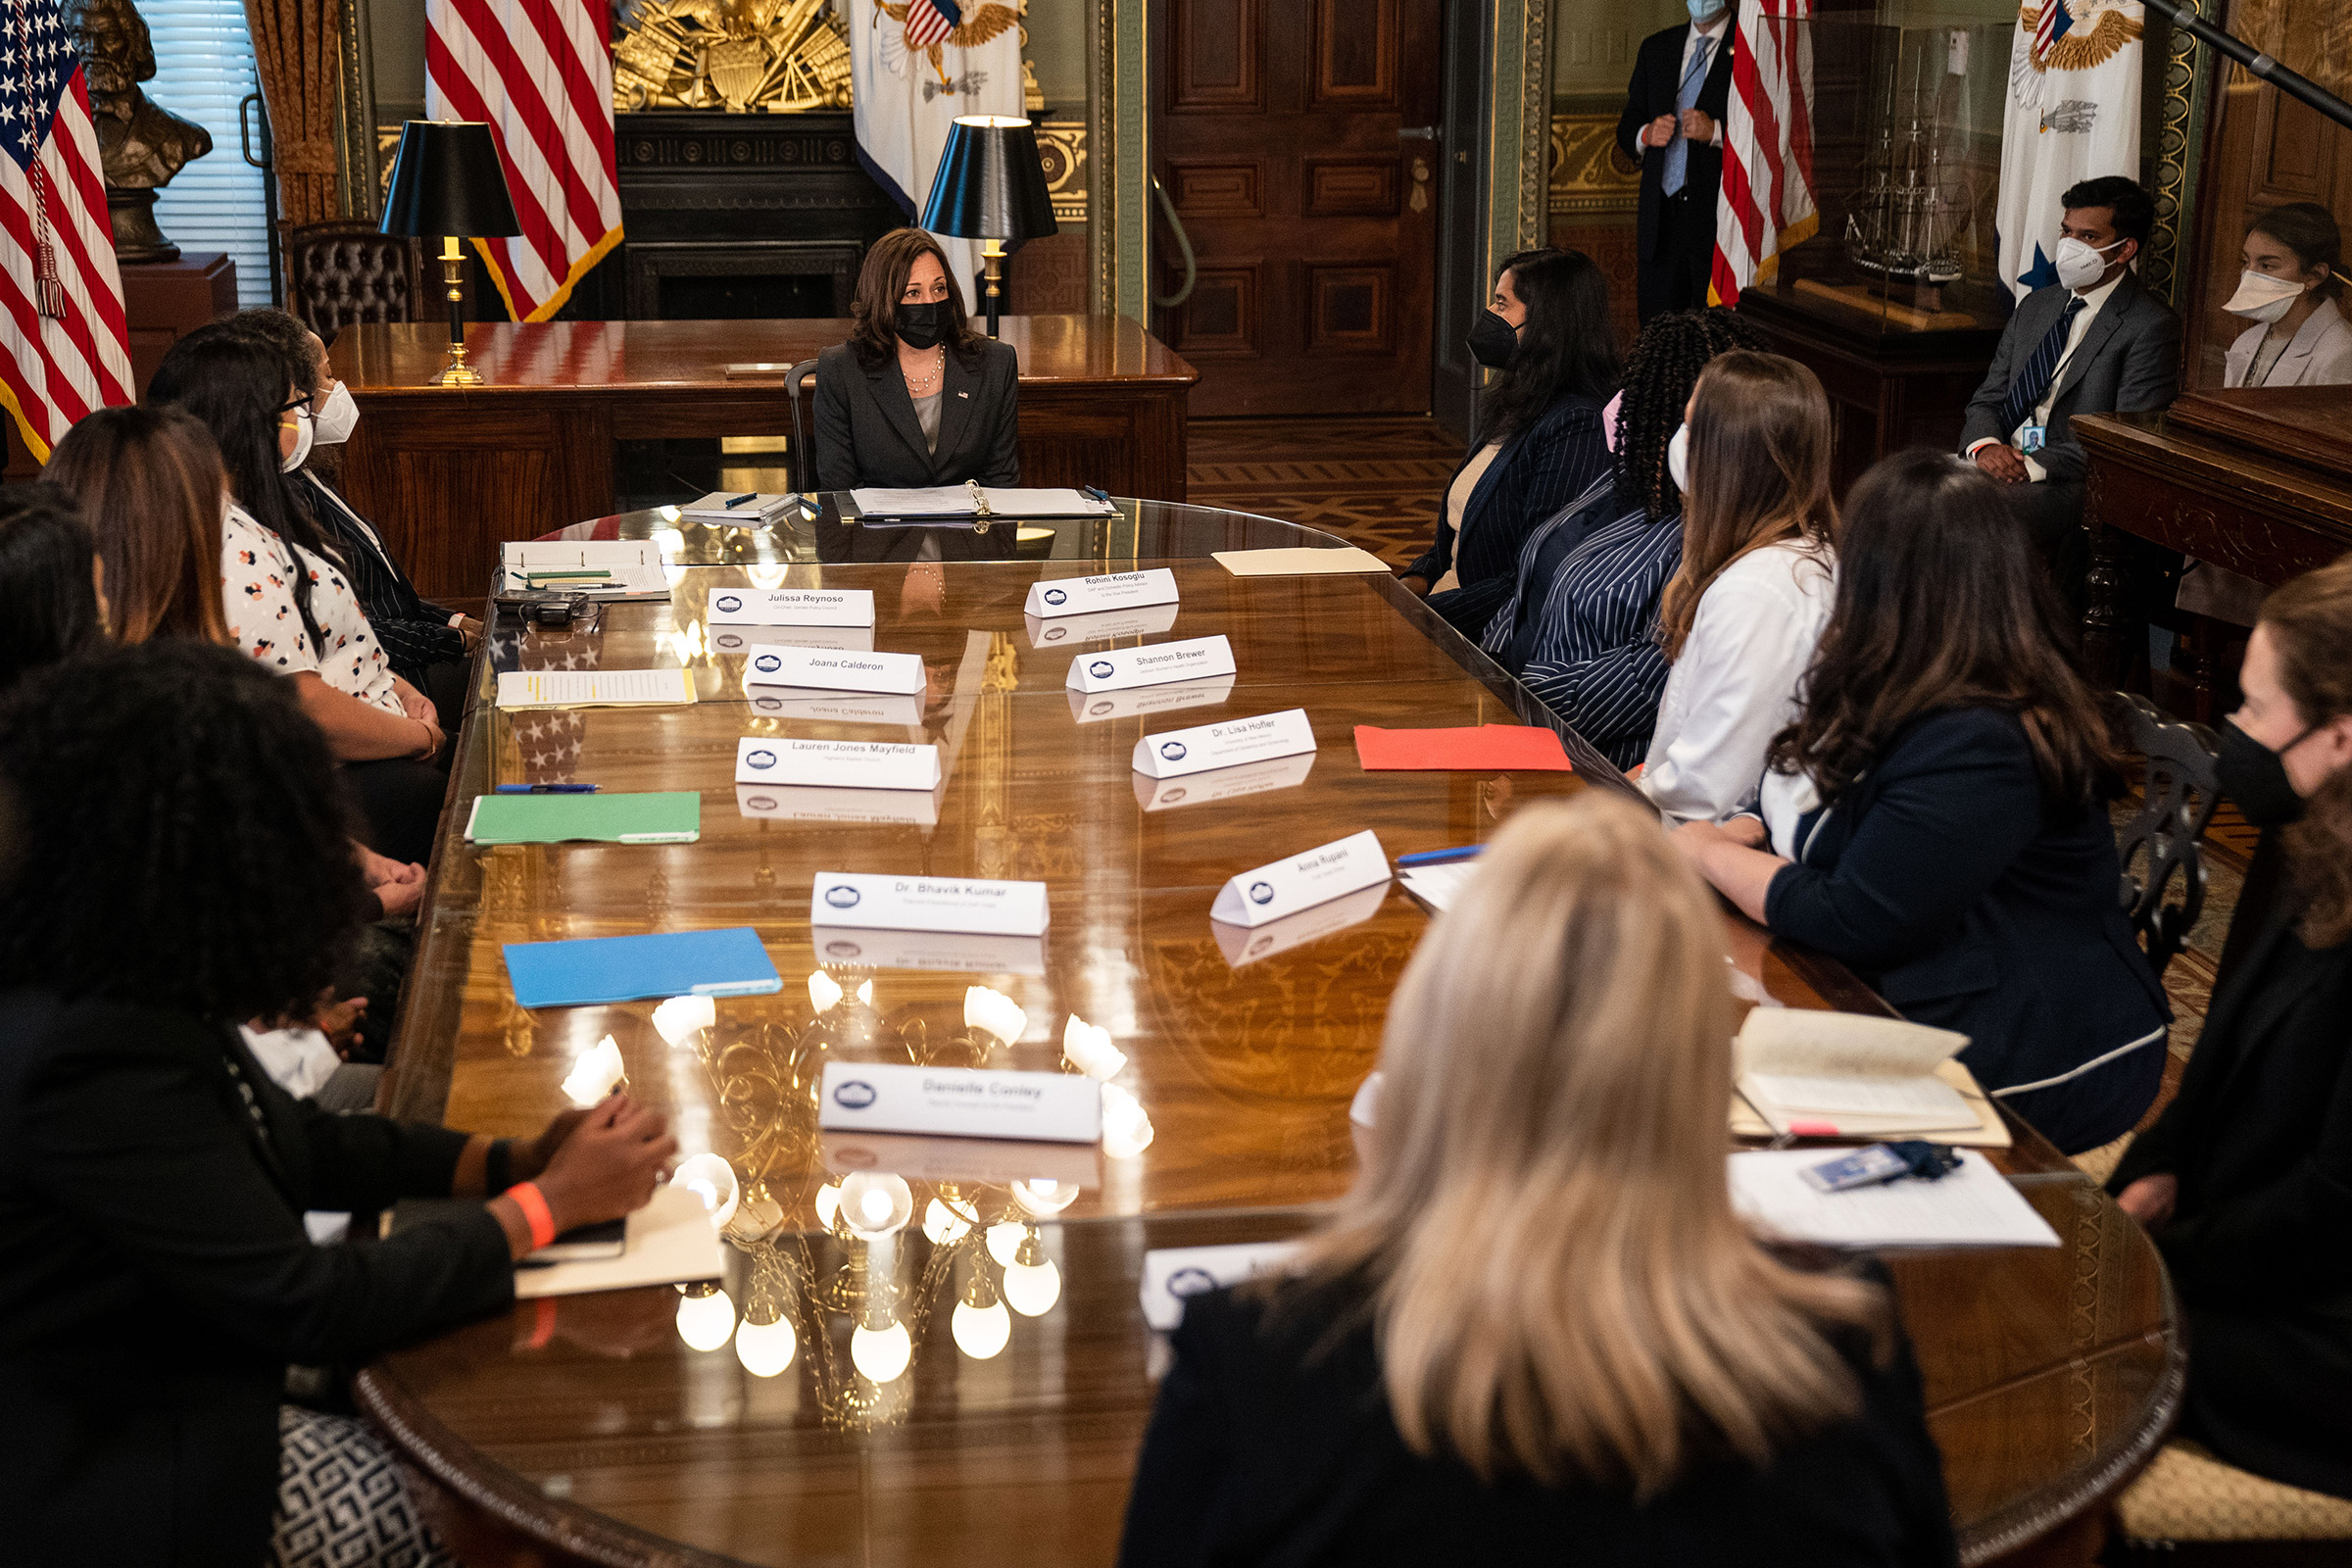 Vice President Kamala Harris meets with abortion and reproductive health providers and patients to discuss the impact of Texas Senate Bill 8 and other restrictions on reproductive care at the White House in Washington, D.C., on Sept. 9, 2021.